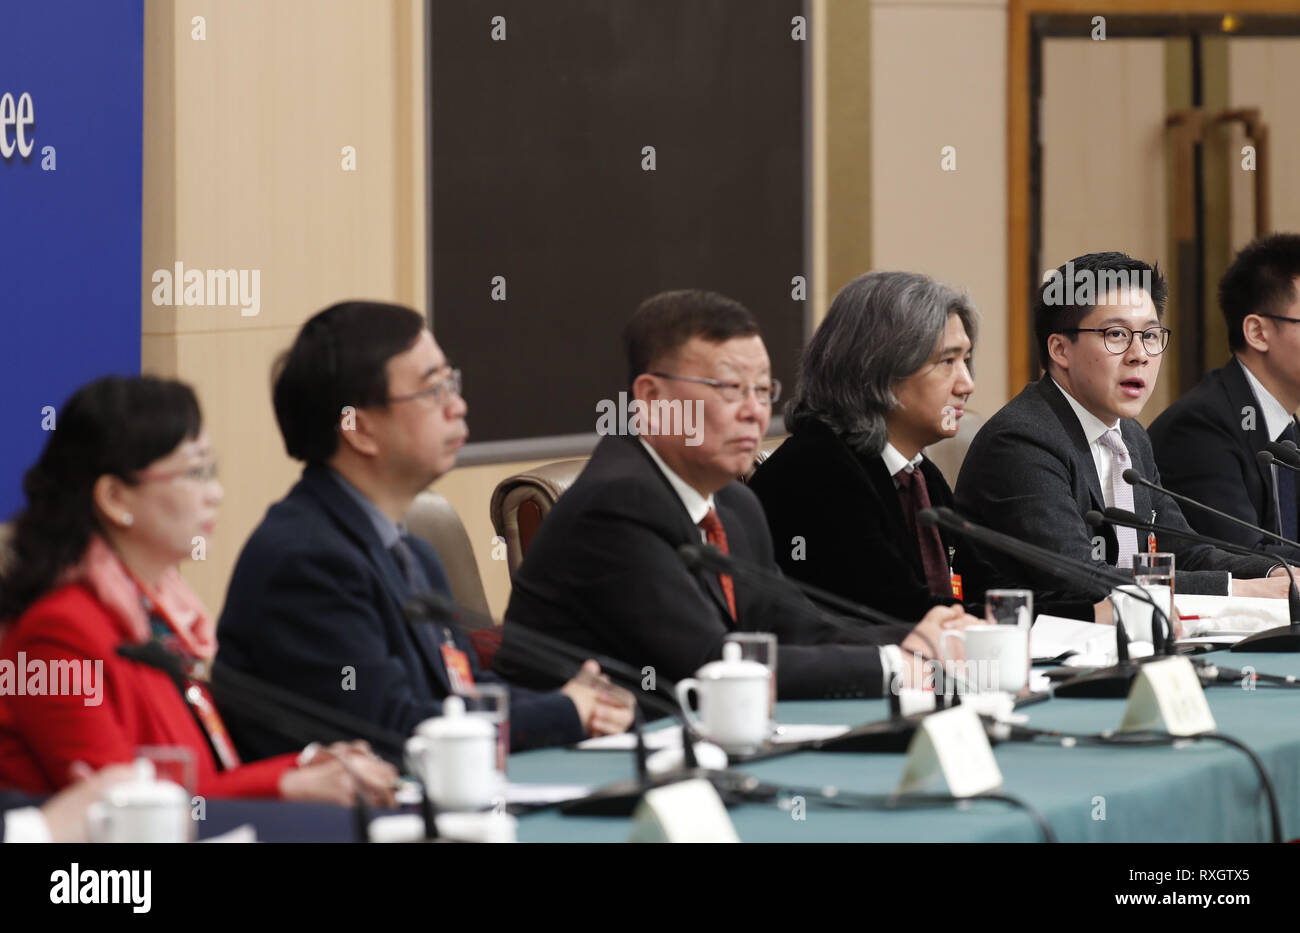 Beijing, China. 10th Mar, 2019. Lai Ming, Wu Weishan, Pan Jianwei, Kenneth Fok Kai-kong and Shi Hong, members of the 13th National Committee of the Chinese People's Political Consultative Conference (CPPCC), attend a press conference on political advisors' performance of duties in the new era for the second session of the 13th CPPCC National Committee in Beijing, capital of China, March 10, 2019. Credit: Shen Bohan/Xinhua/Alamy Live News Stock Photo